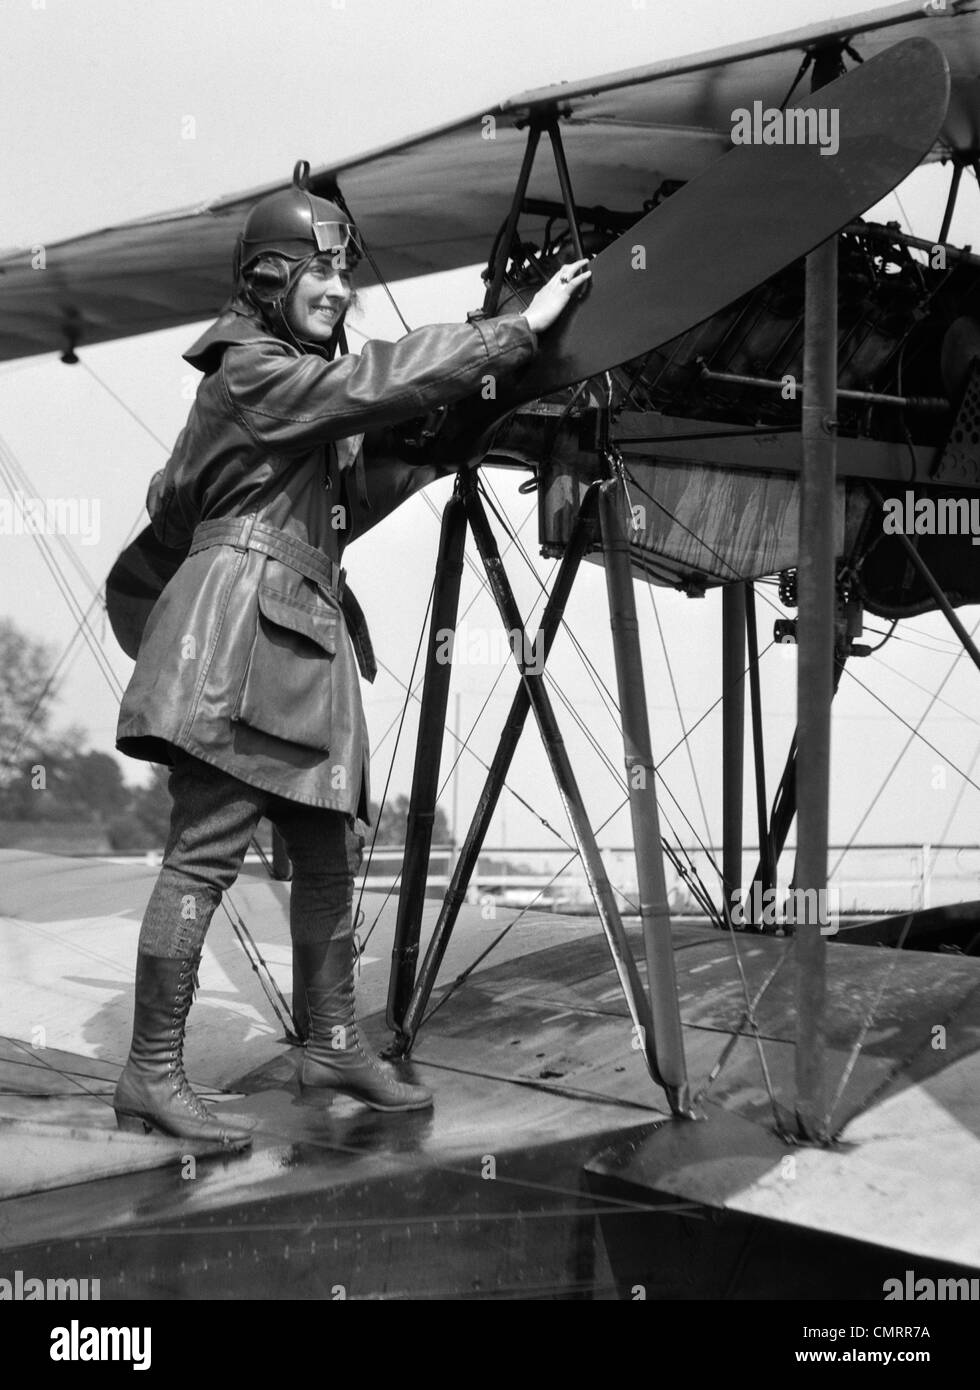 1920s SMILING WOMAN AVIATOR TURNING FLOAT BIPLANE PROPELLER WEARING LEATHER FLYING CLOTHES GOGGLES AND HELMET Stock Photo